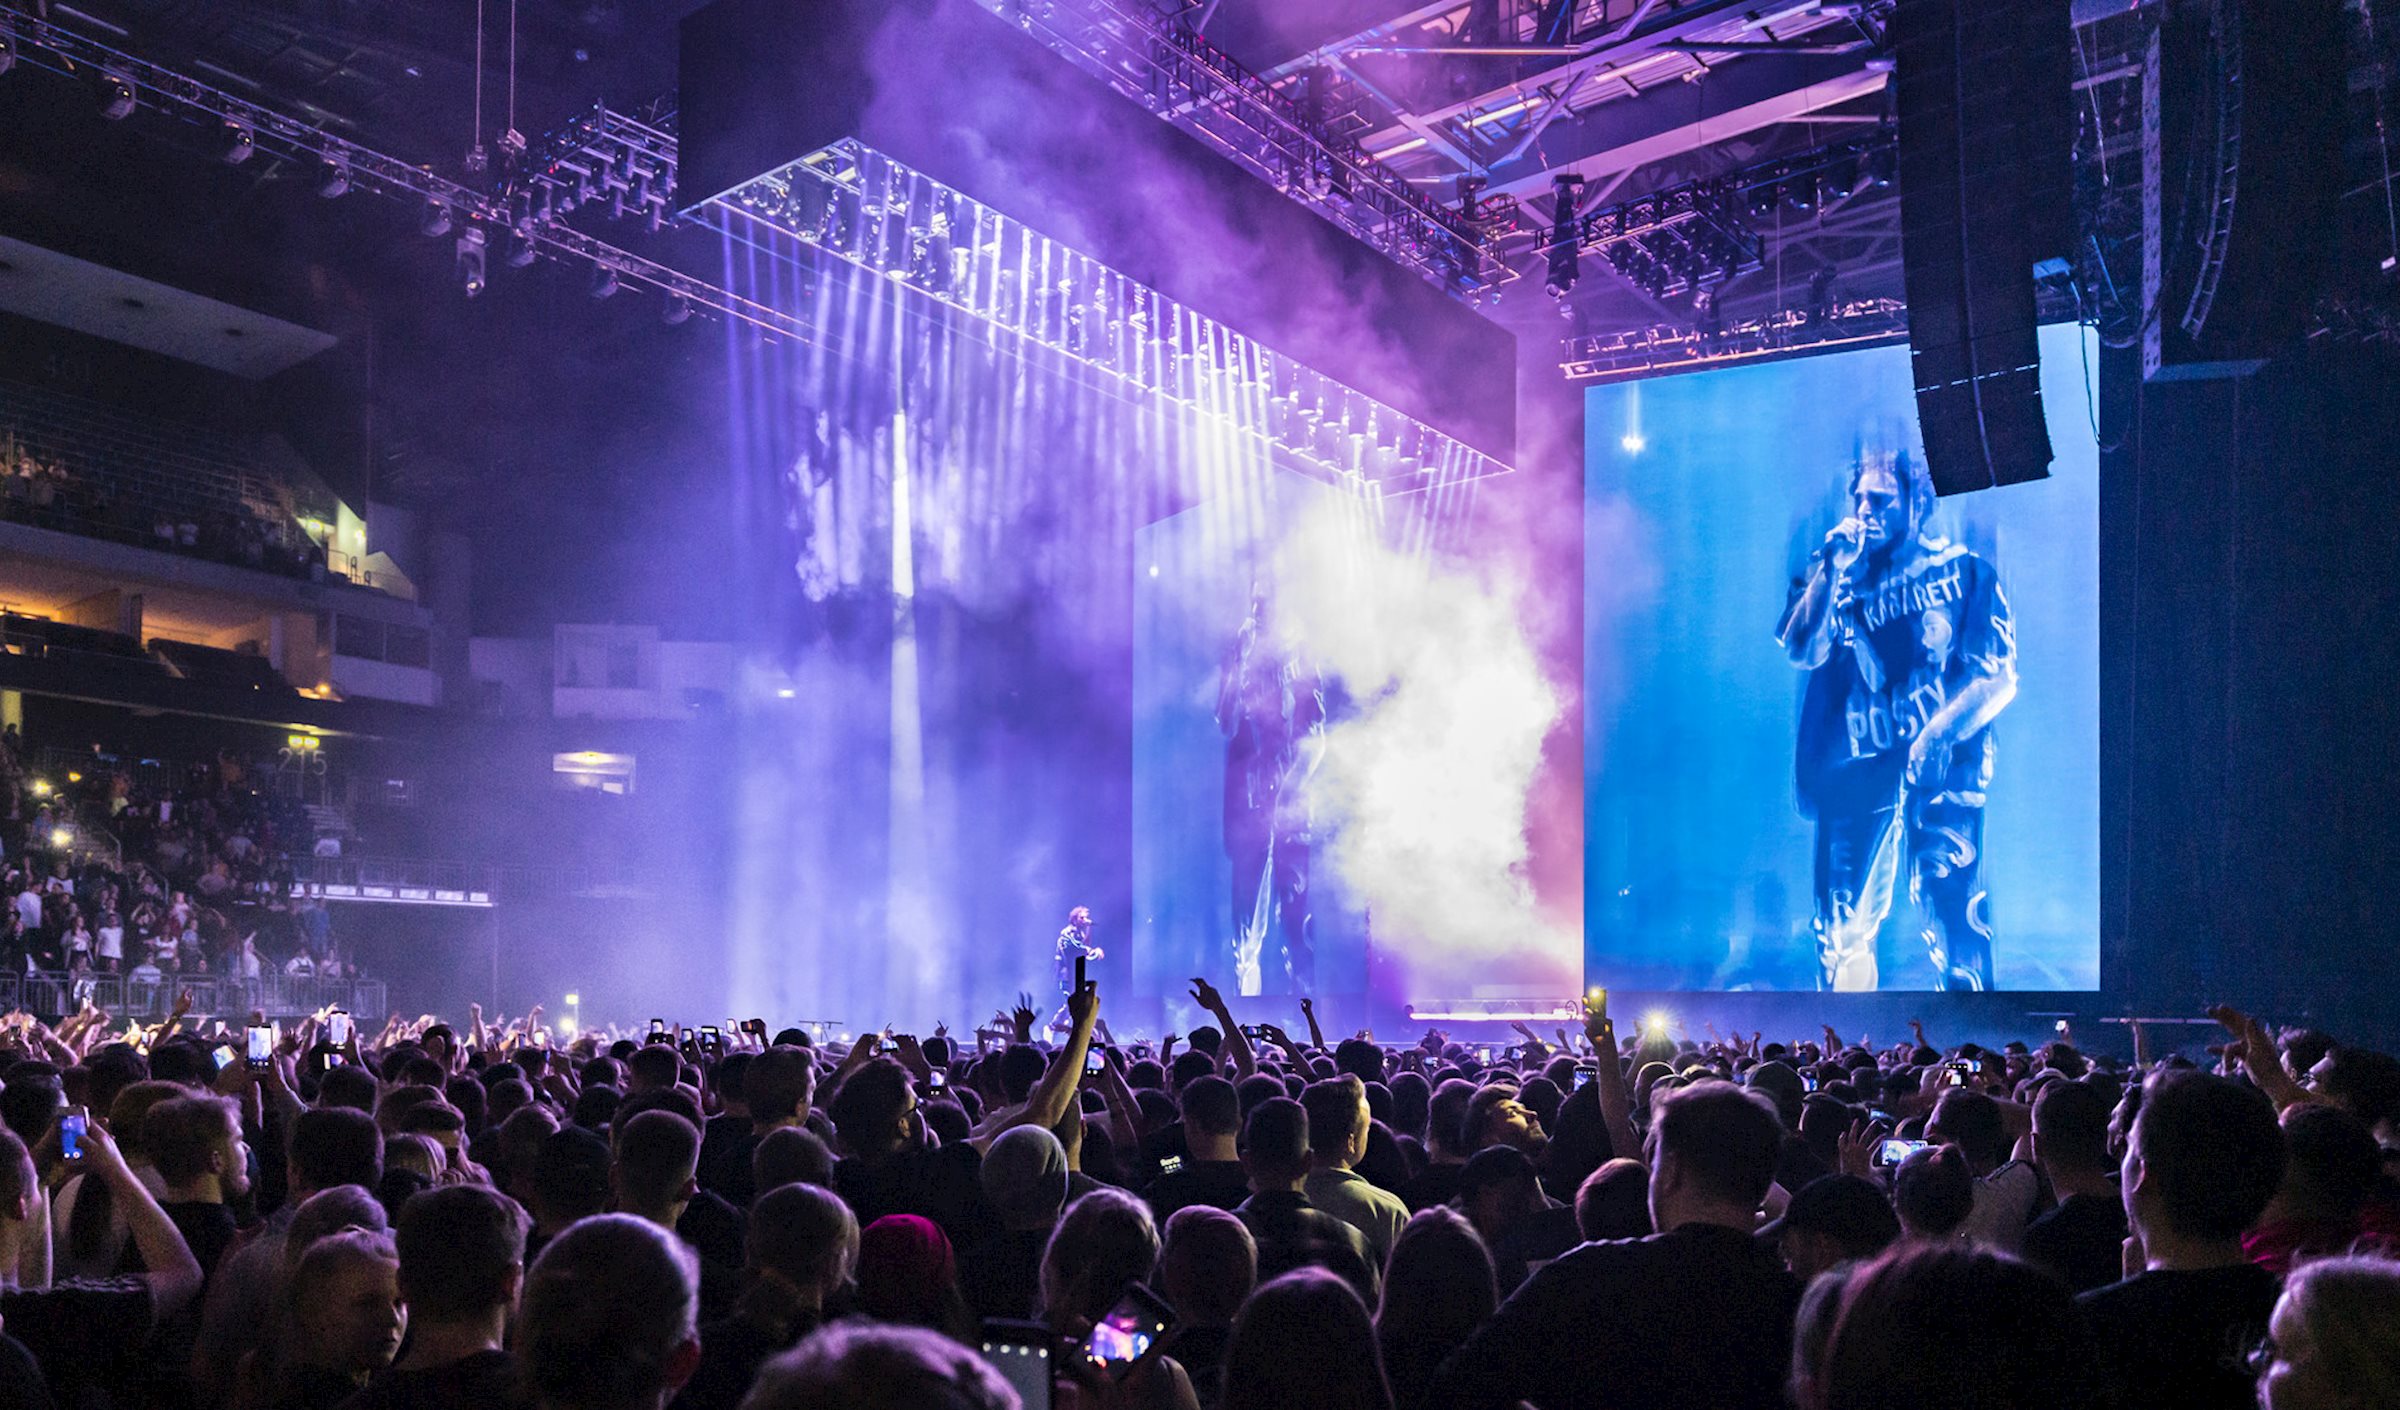 PRG is supporting Post Malone worldwide by providing 360 concert touring services, including sound, video, lighting and rigging.